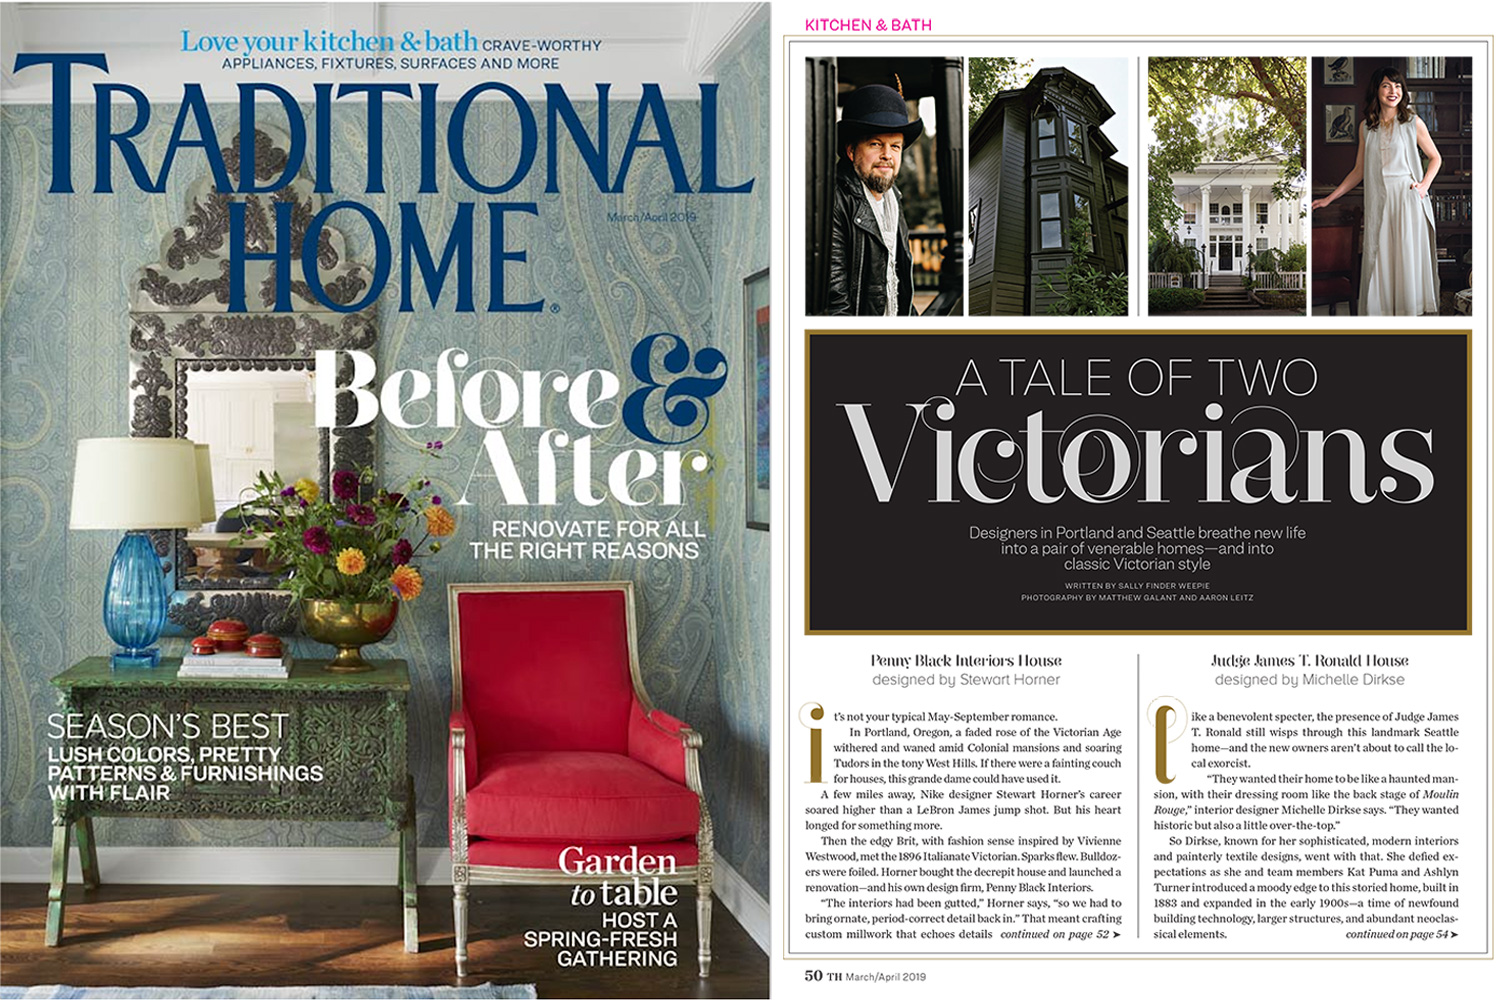 Traditional-Home-March_April-2019-Edition-A-tale-of-two-Victorians